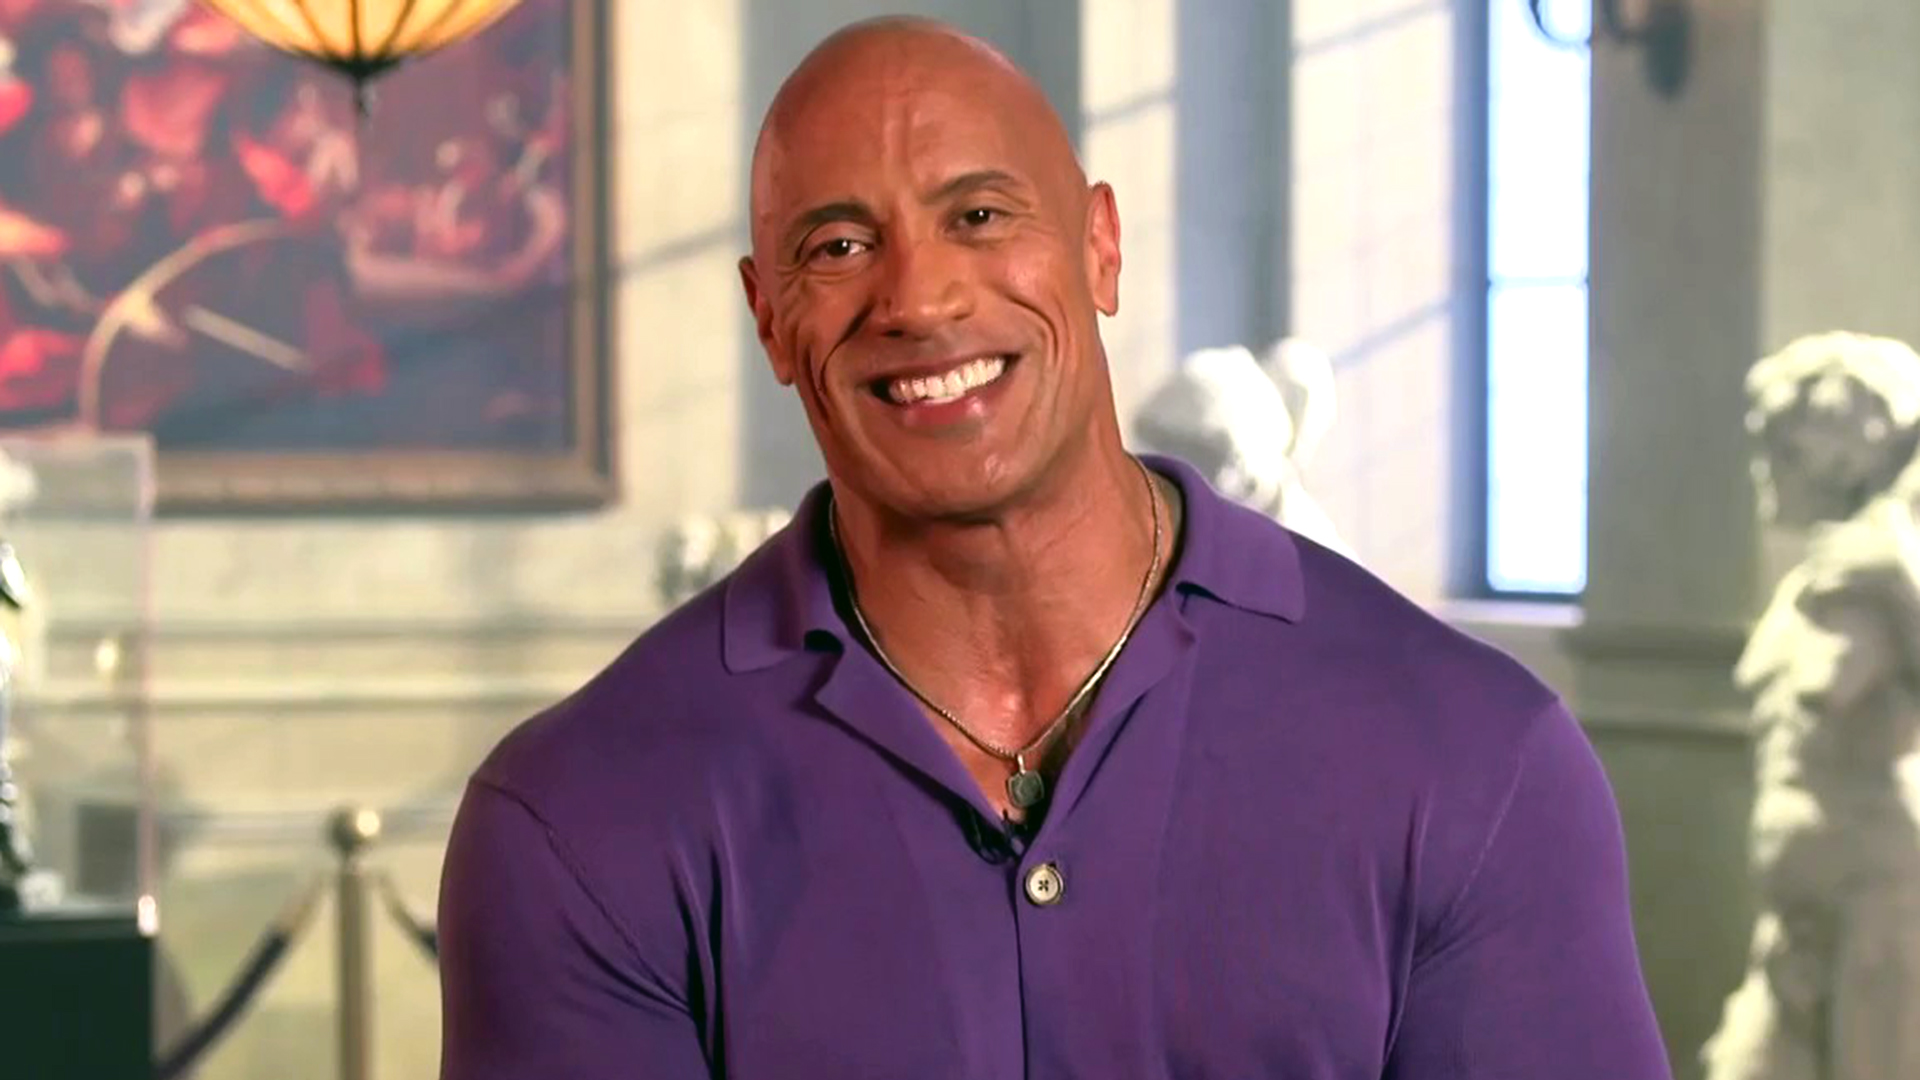 Why did the rock appear on my screen